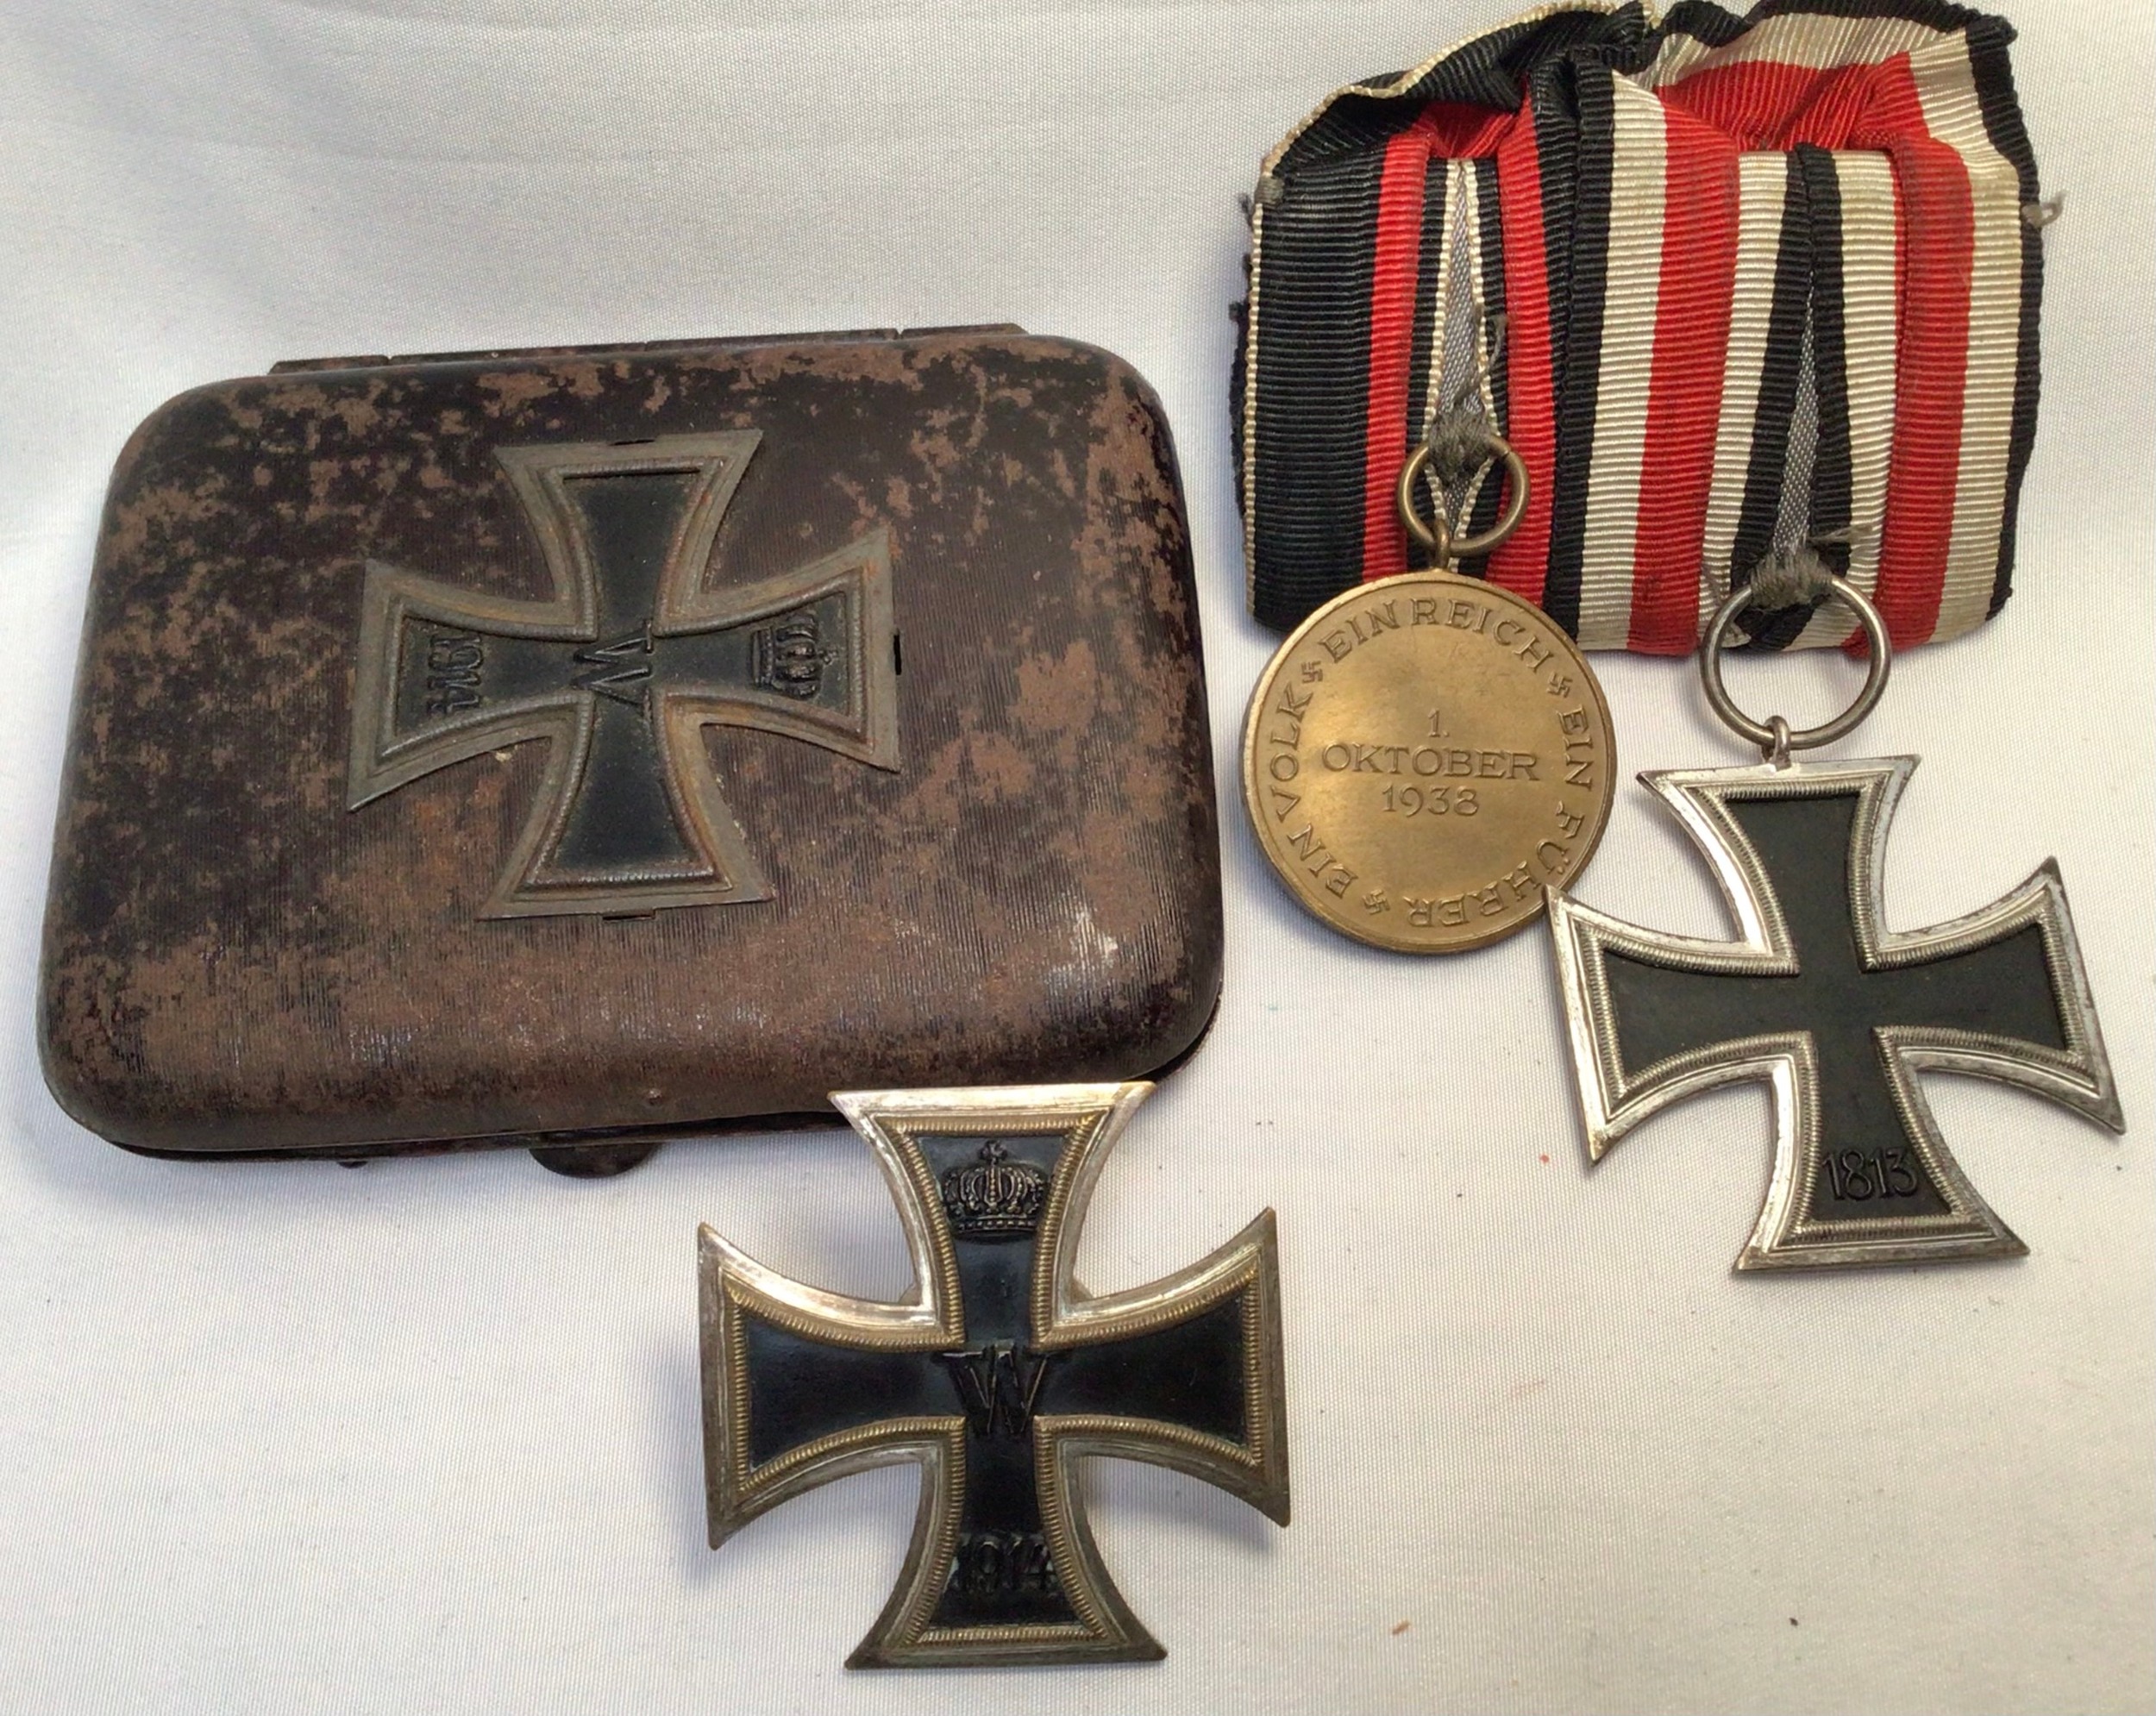 A WWI German Iron cross with crown above ‘W’ above date 1914, with screw on back, together with a